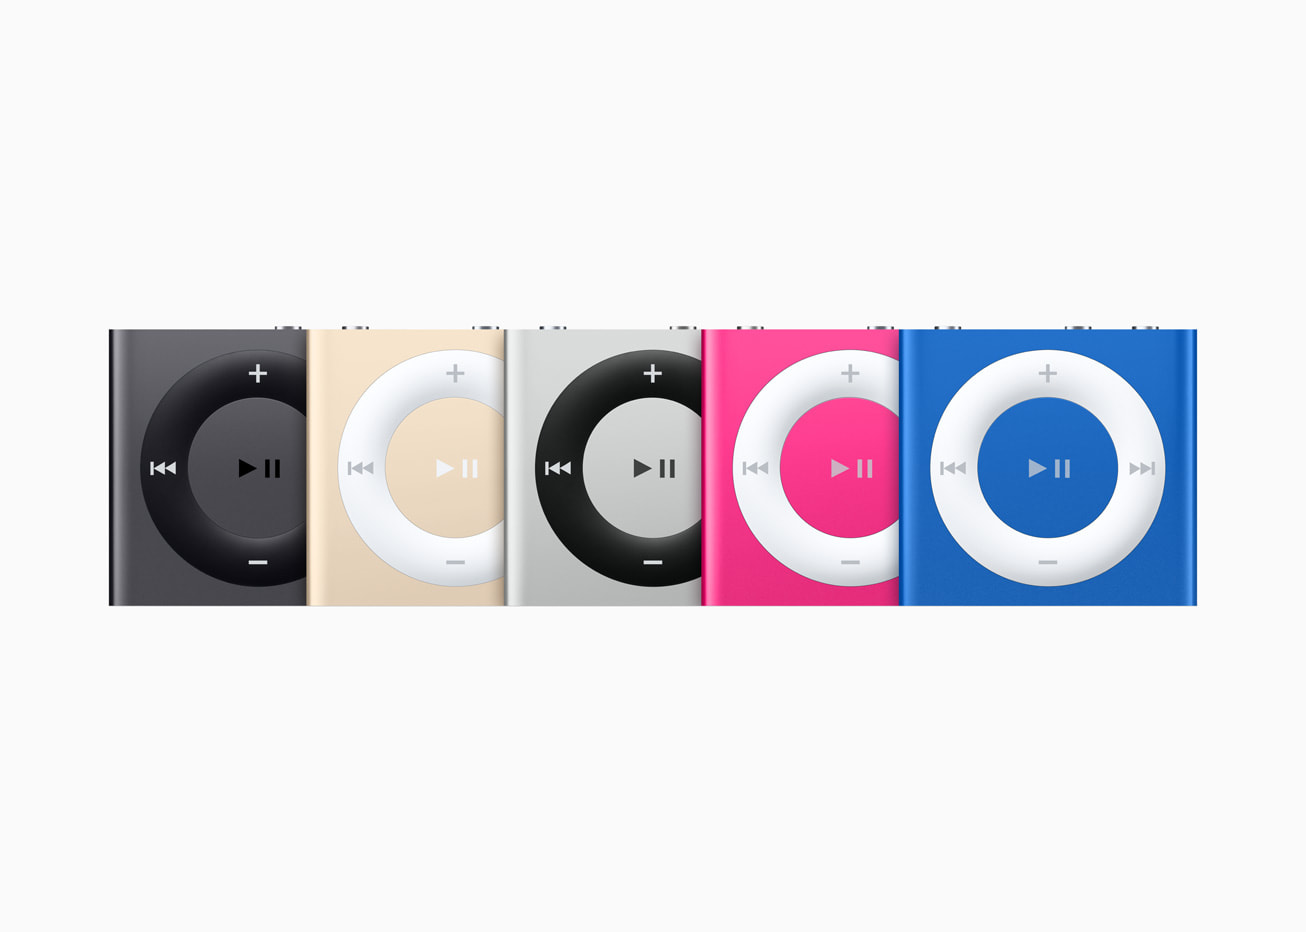 Image of five iPod Shuffle (4th generation) in different colors